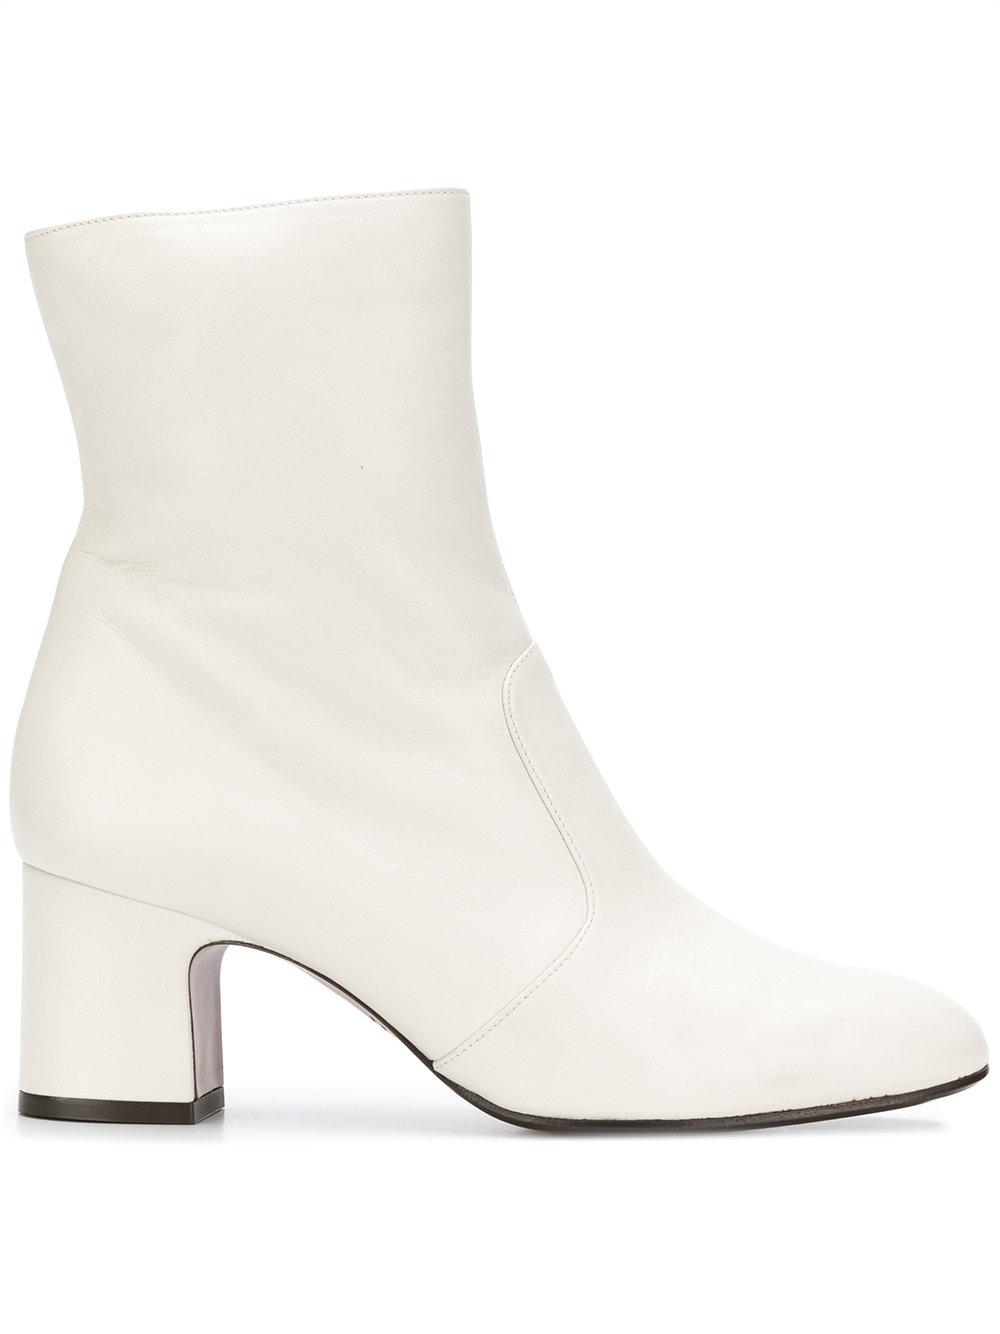 Chie Mihara Leather Naylon Low-heel Boots in White - Lyst